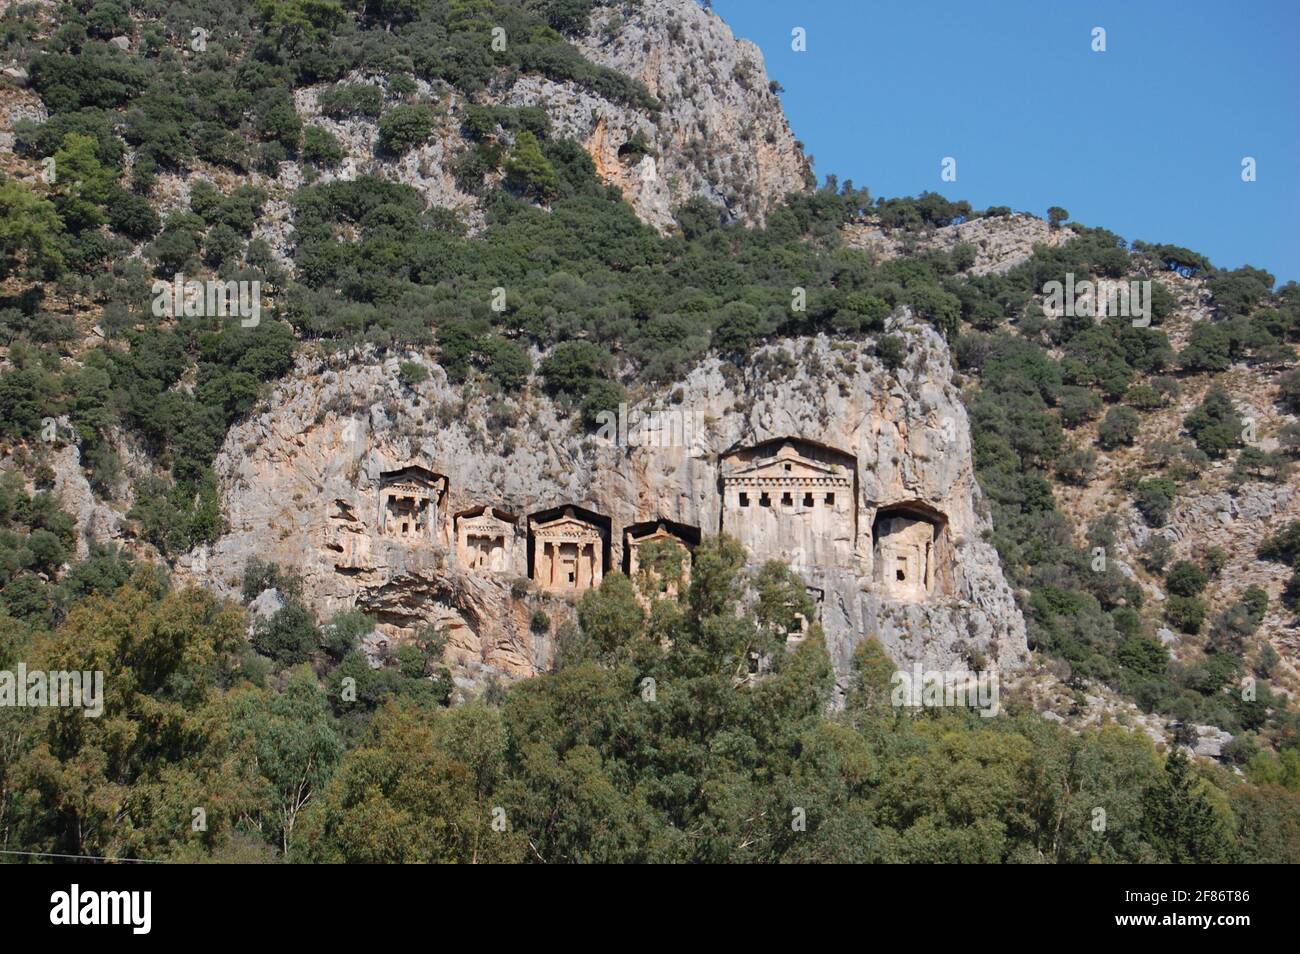 Turkey, Anatolie, the famous lycien tombs carved in the rocks in the ancient Kaunos city near De Dalyan. Stock Photo